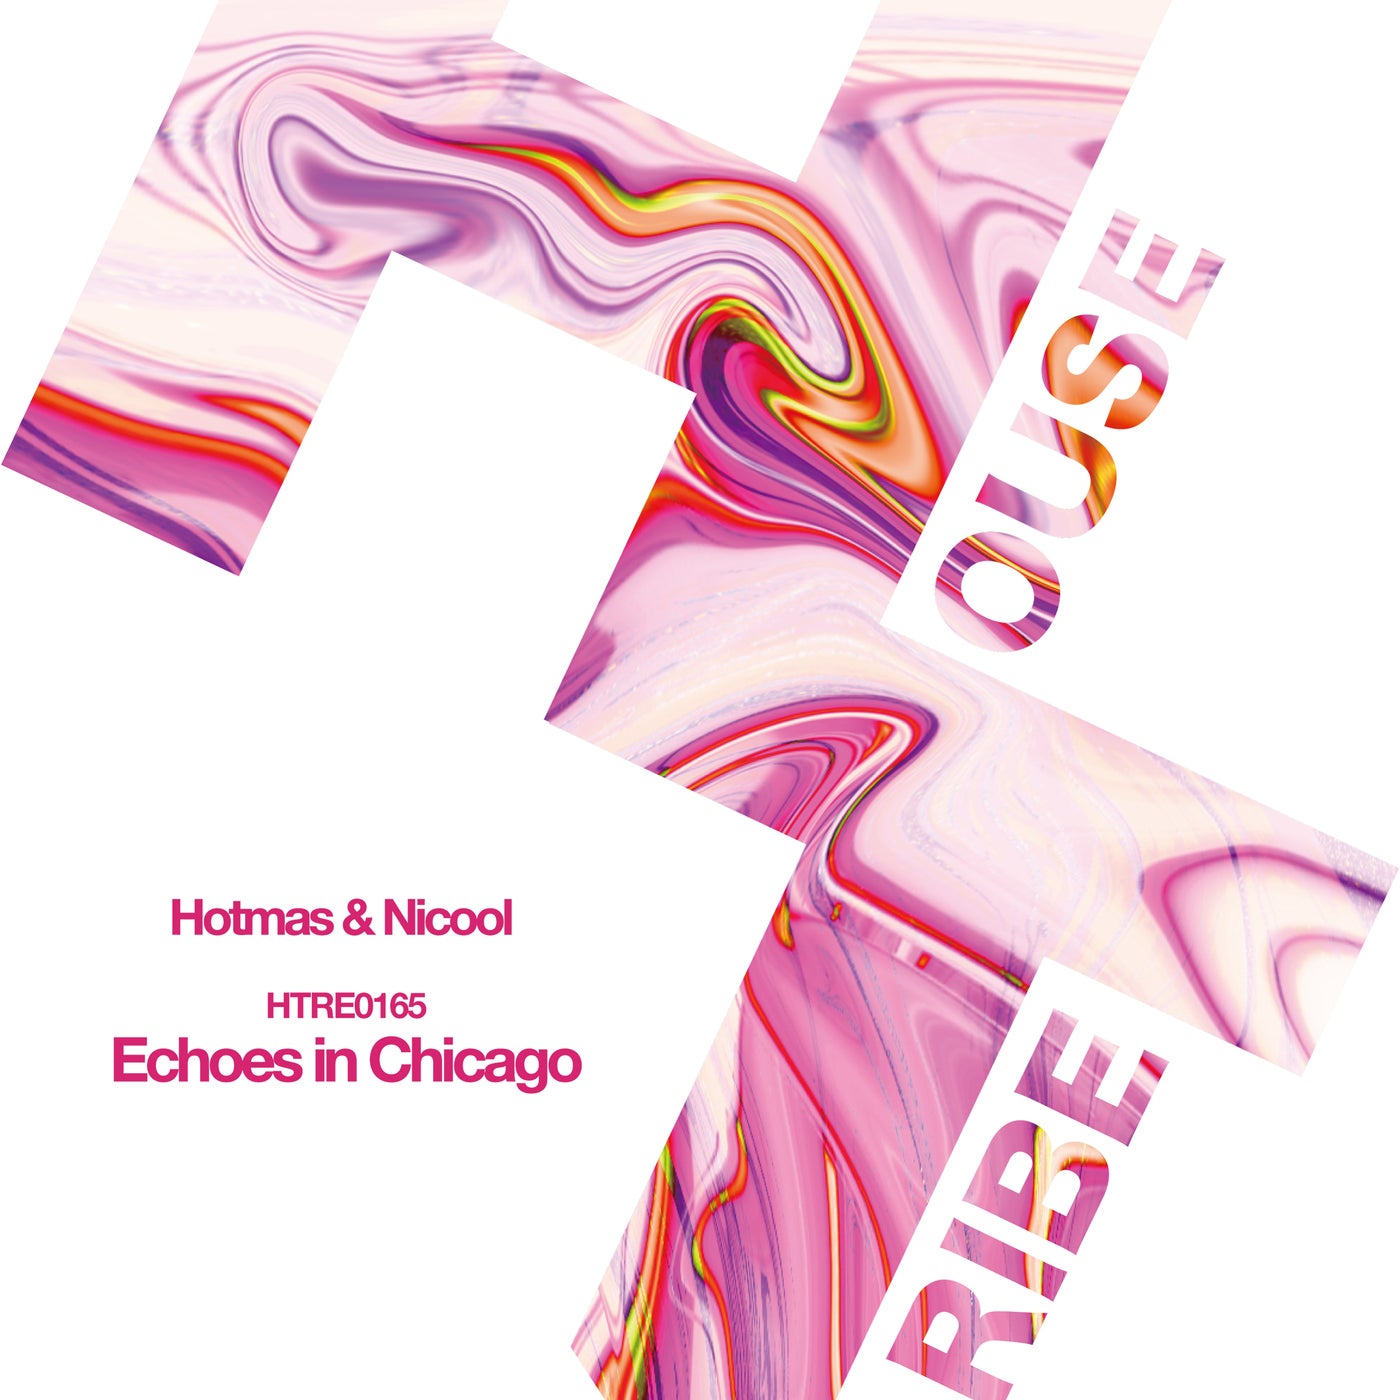 Echoes in Chicago